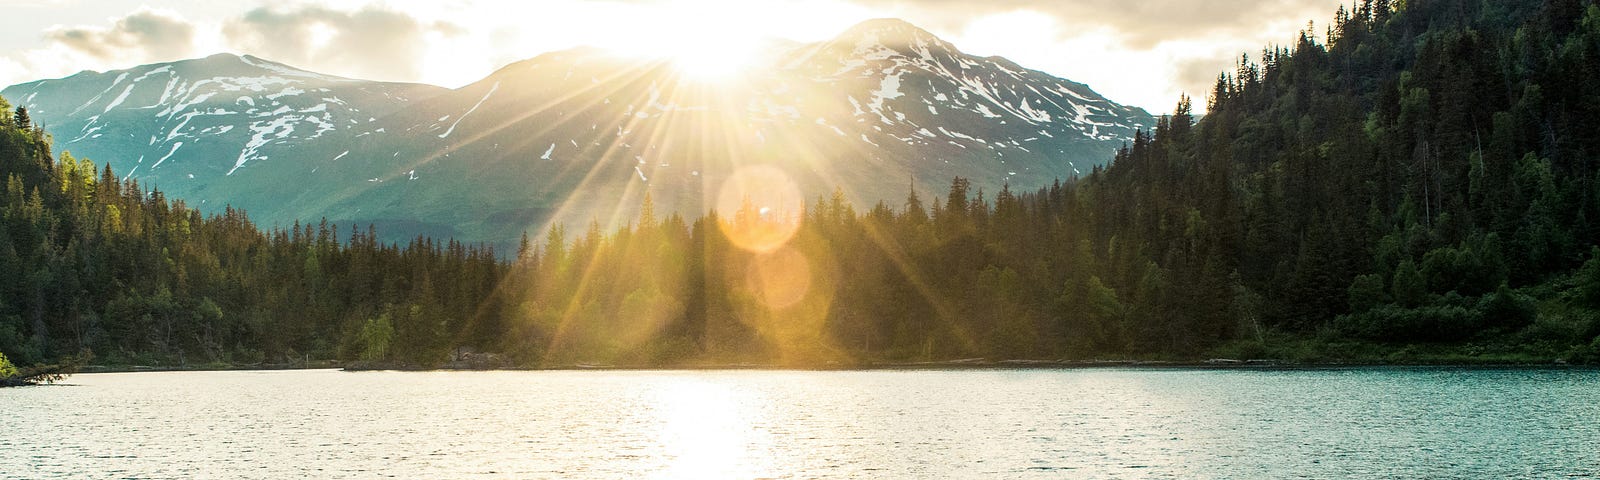 Sun shining from behind a mountain in the background with densely packed trees in the middleground and a lake in the foreground